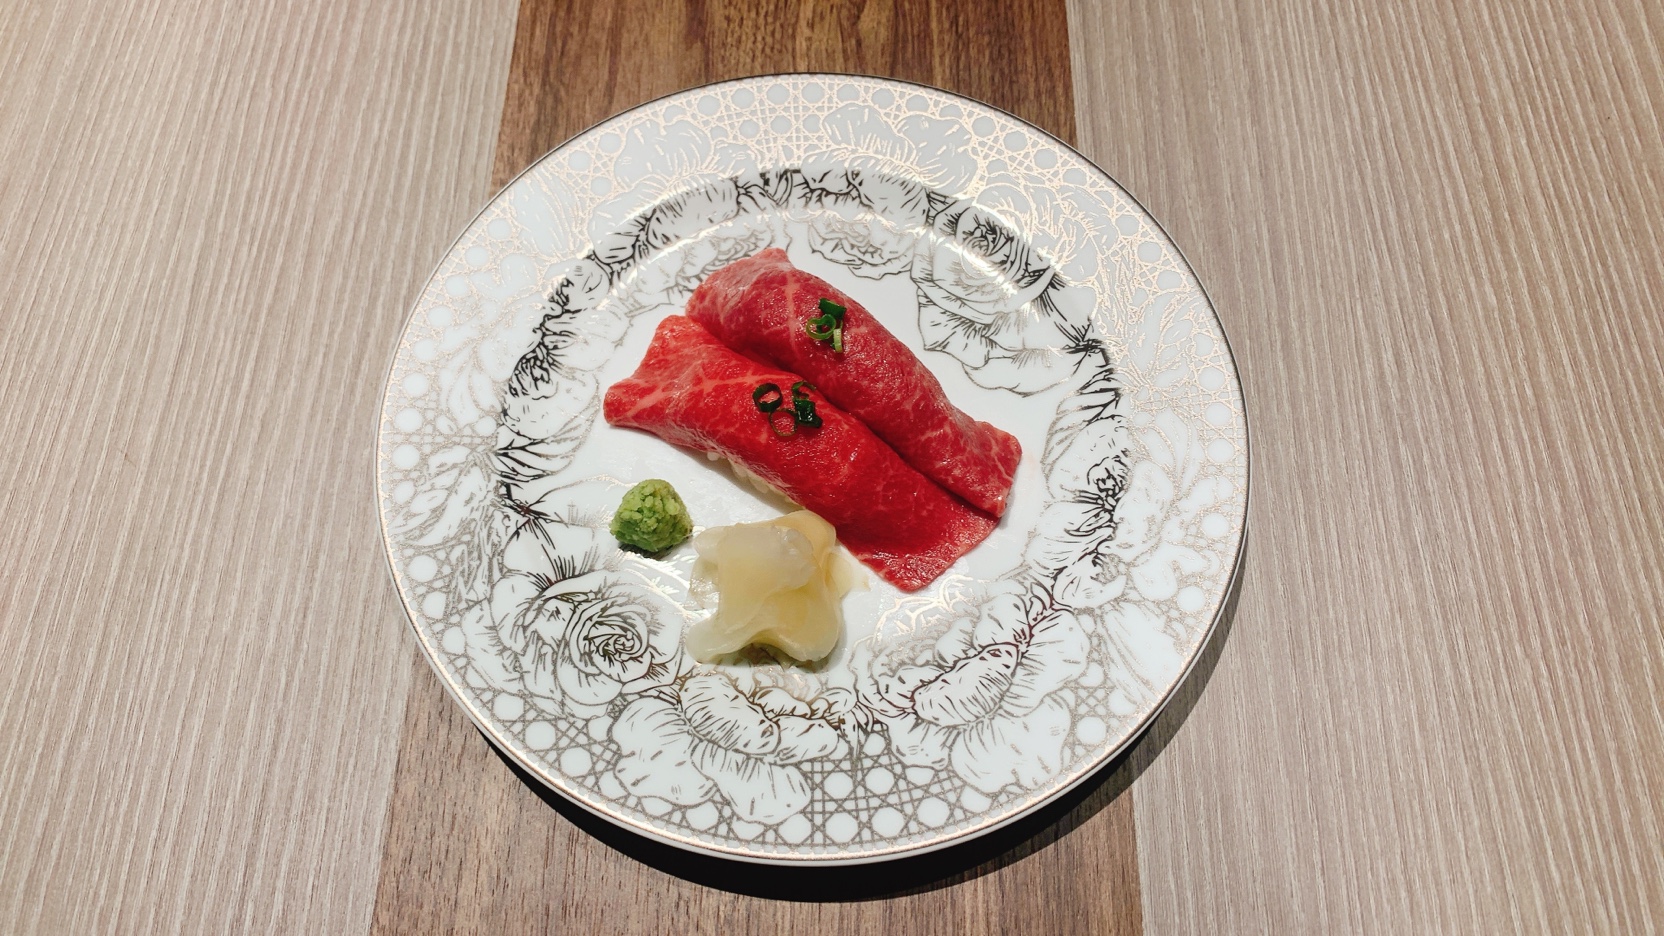 Two servings of meat sushi made with Kuroge Wagyu beef